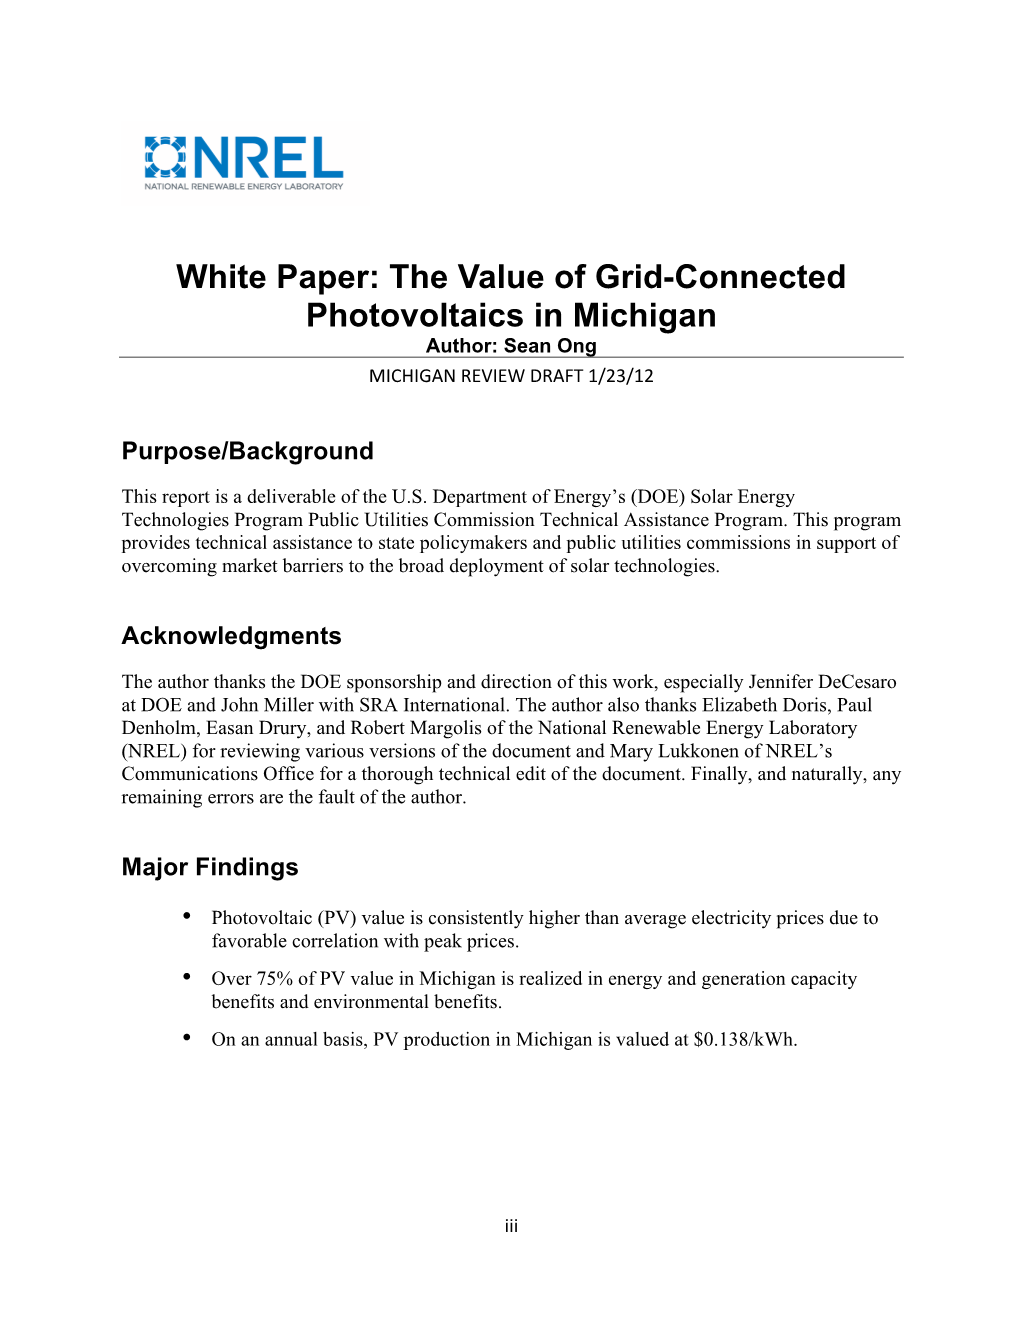 The Value of Grid-Connected Photovoltaics in Michigan Author: Sean Ong MICHIGAN REVIEW DRAFT 1/23/12